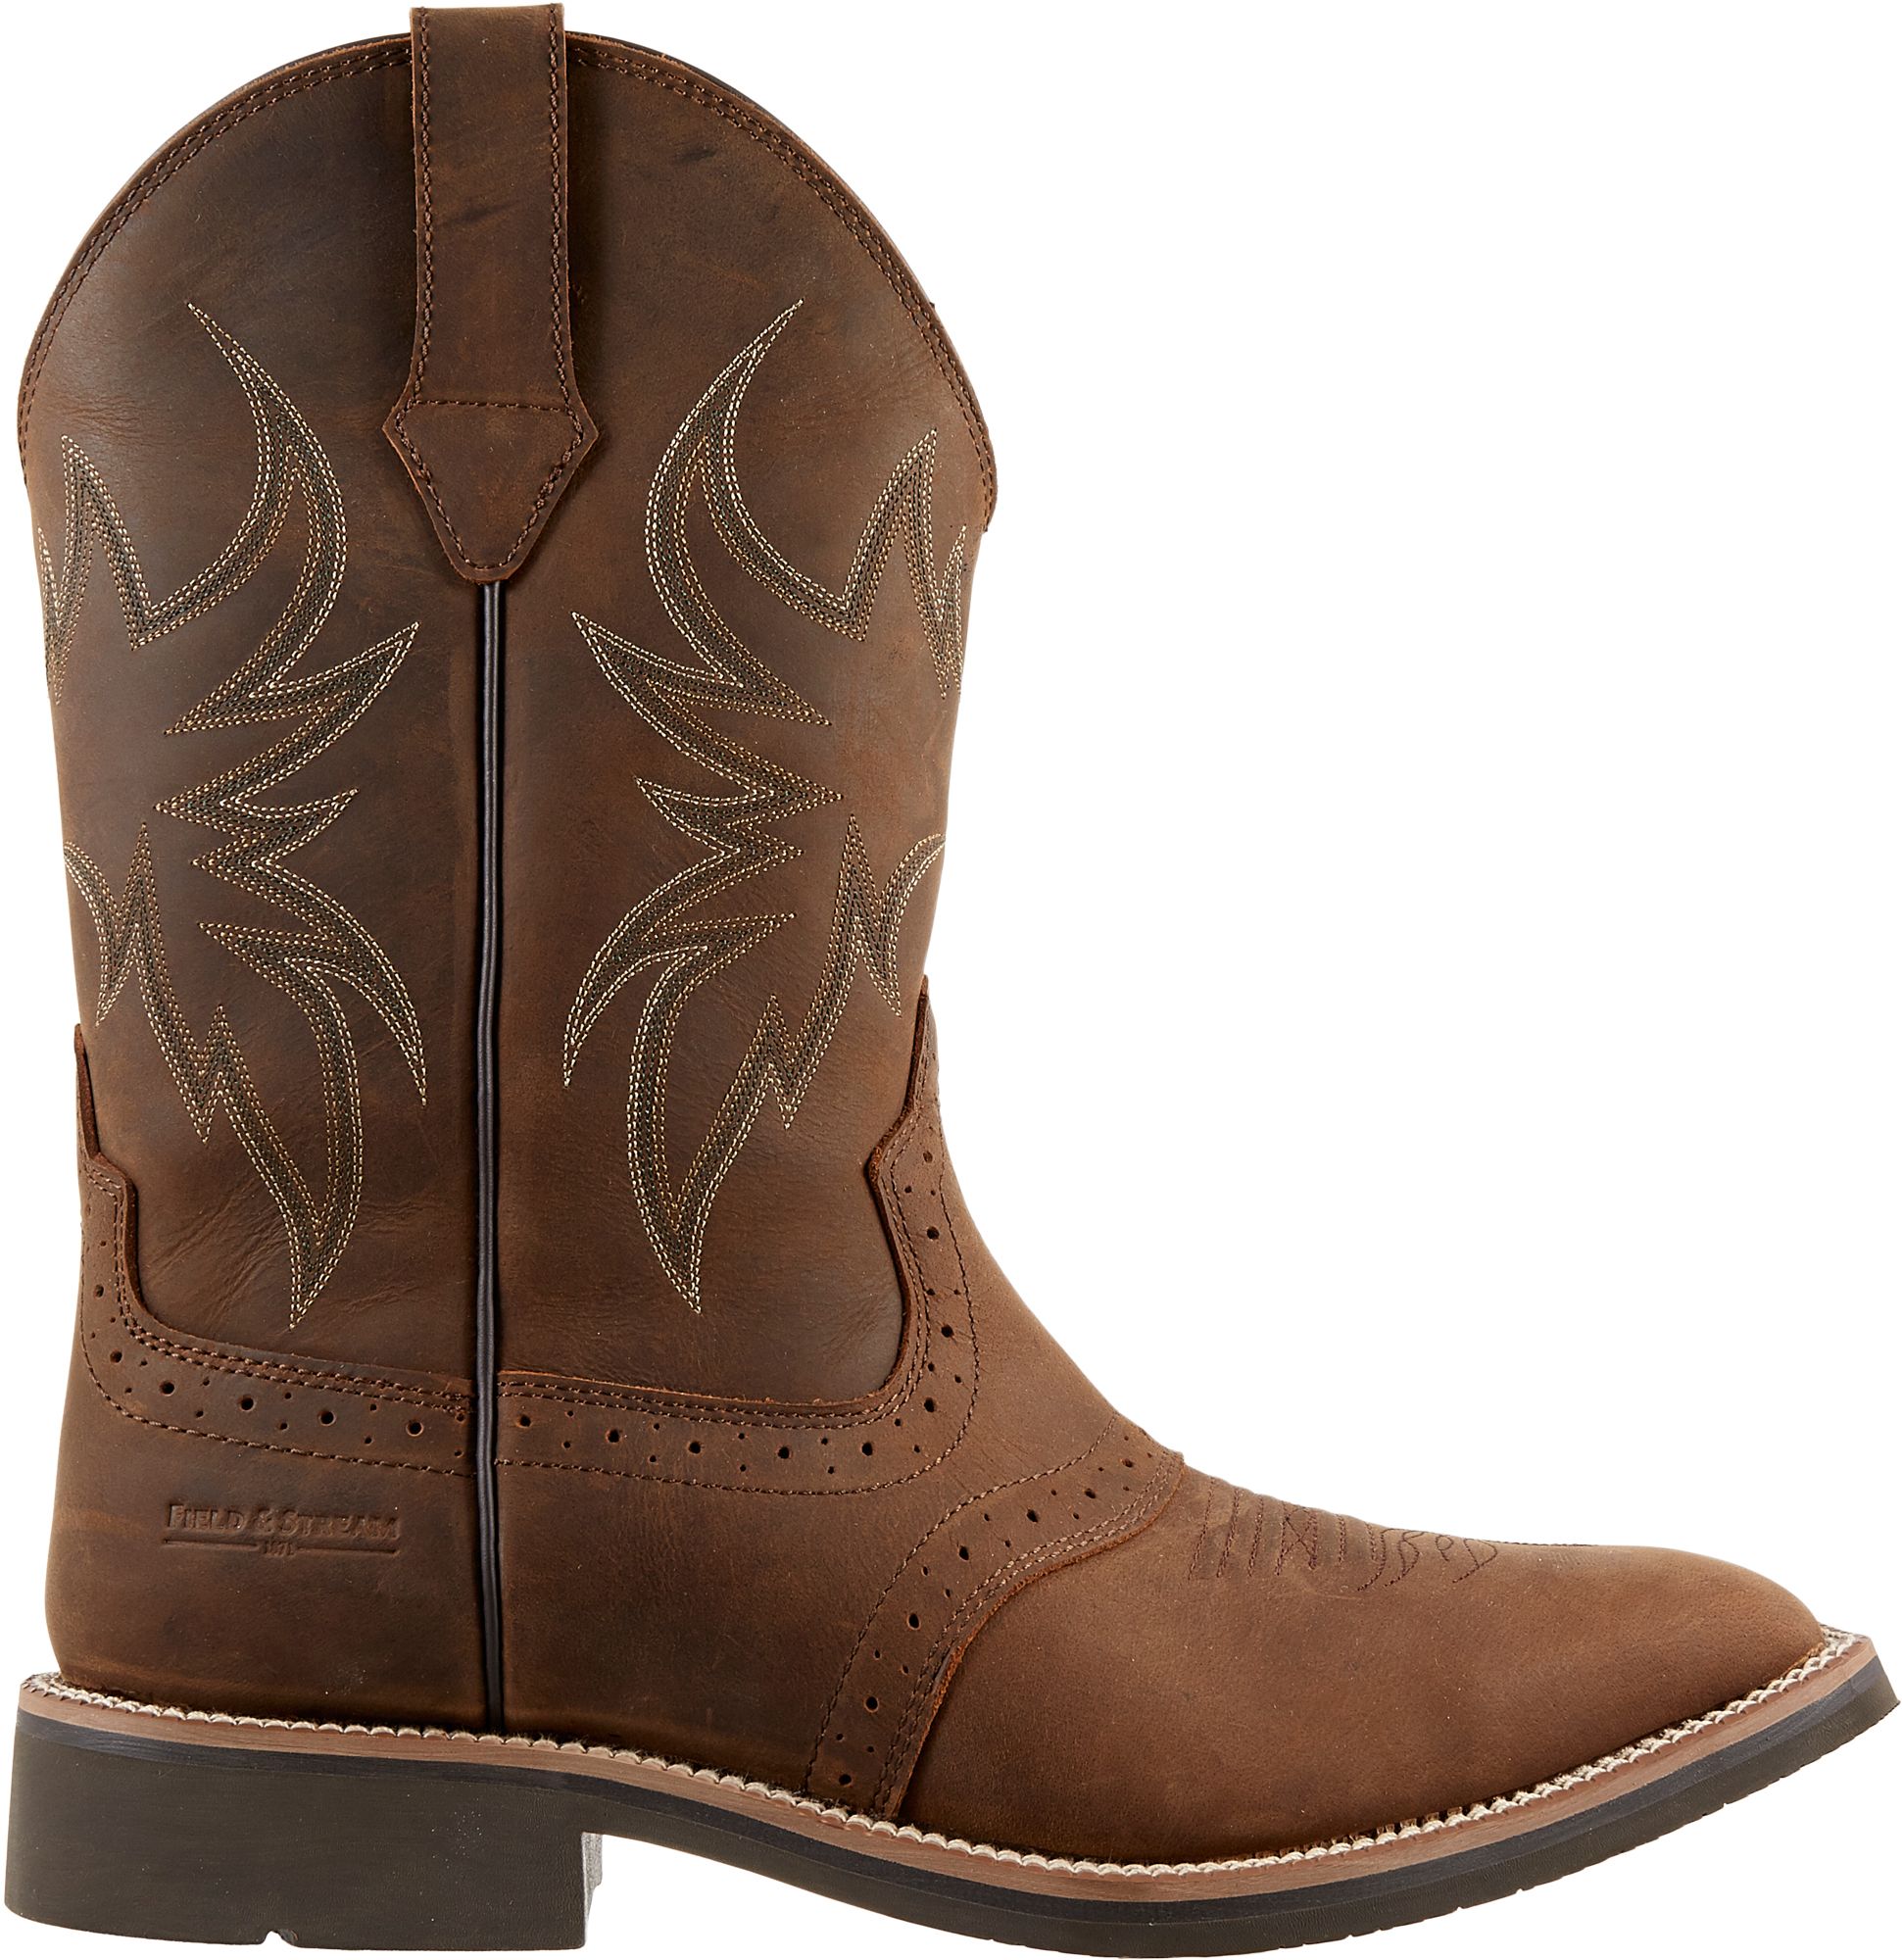 Field & Stream Men's Square Toe Western Boots | DICK'S Sporting Goods